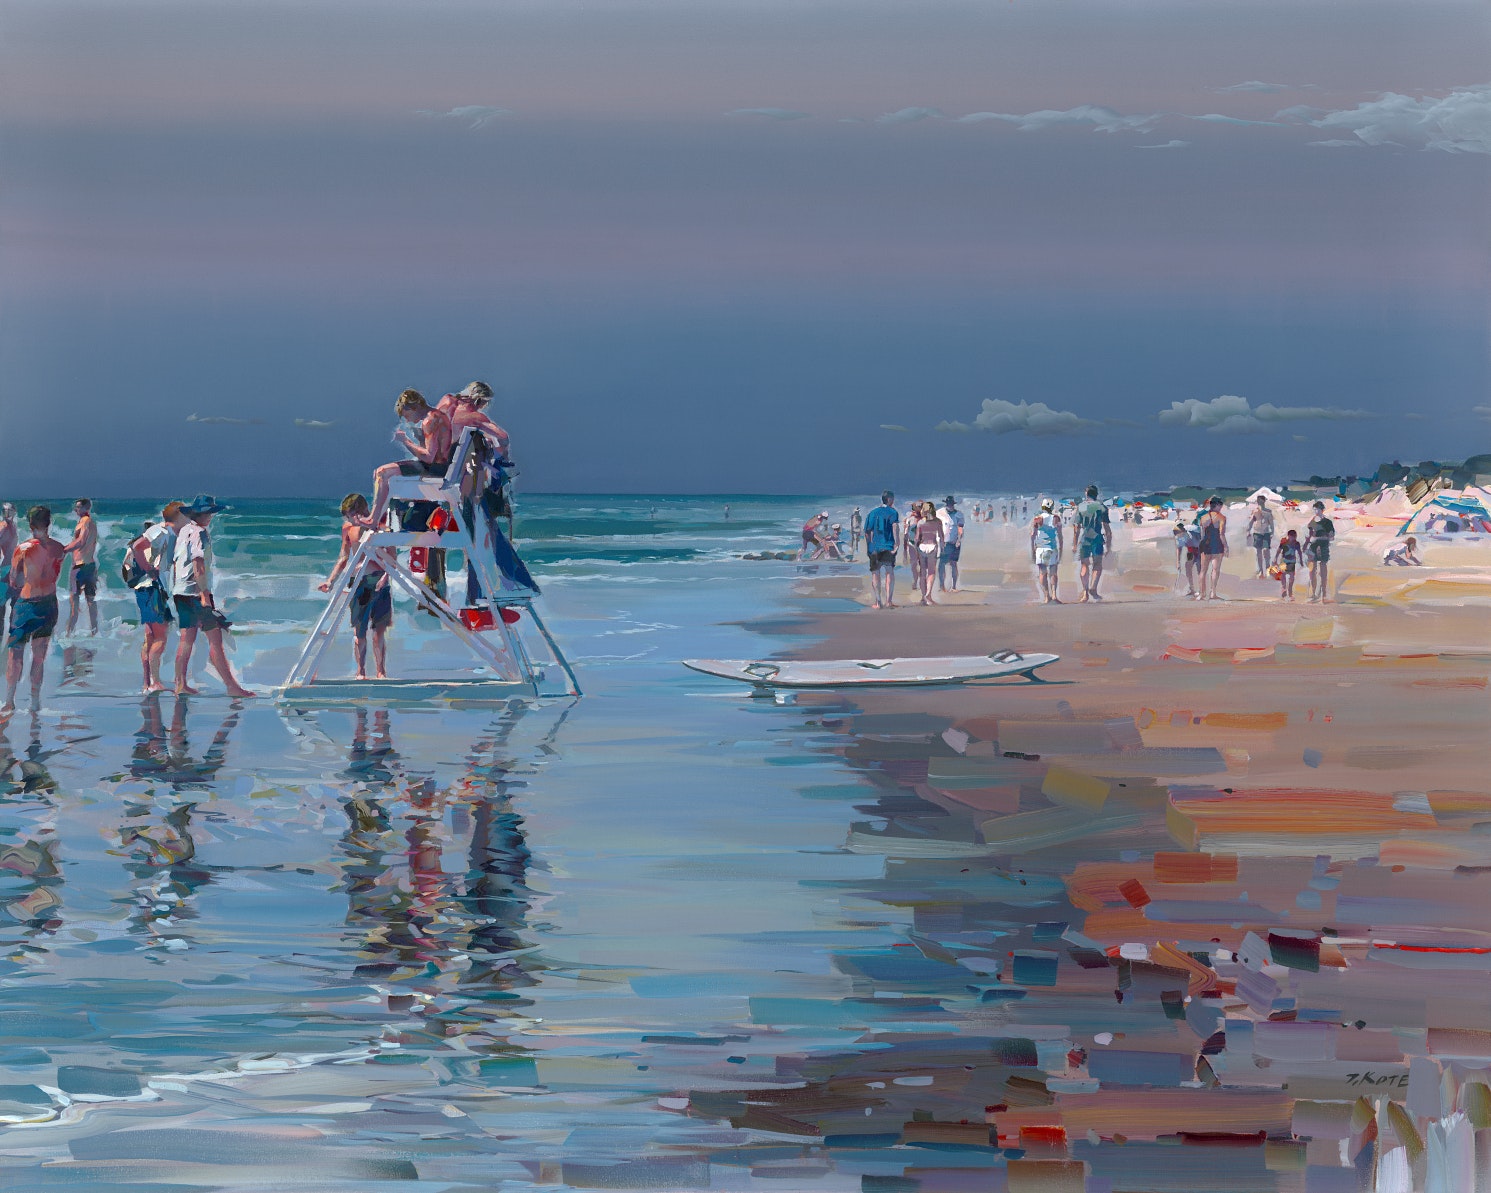 JOSEF KOTE - Summertime - Embellished Giclee on Canvas - 40x50 inxhes